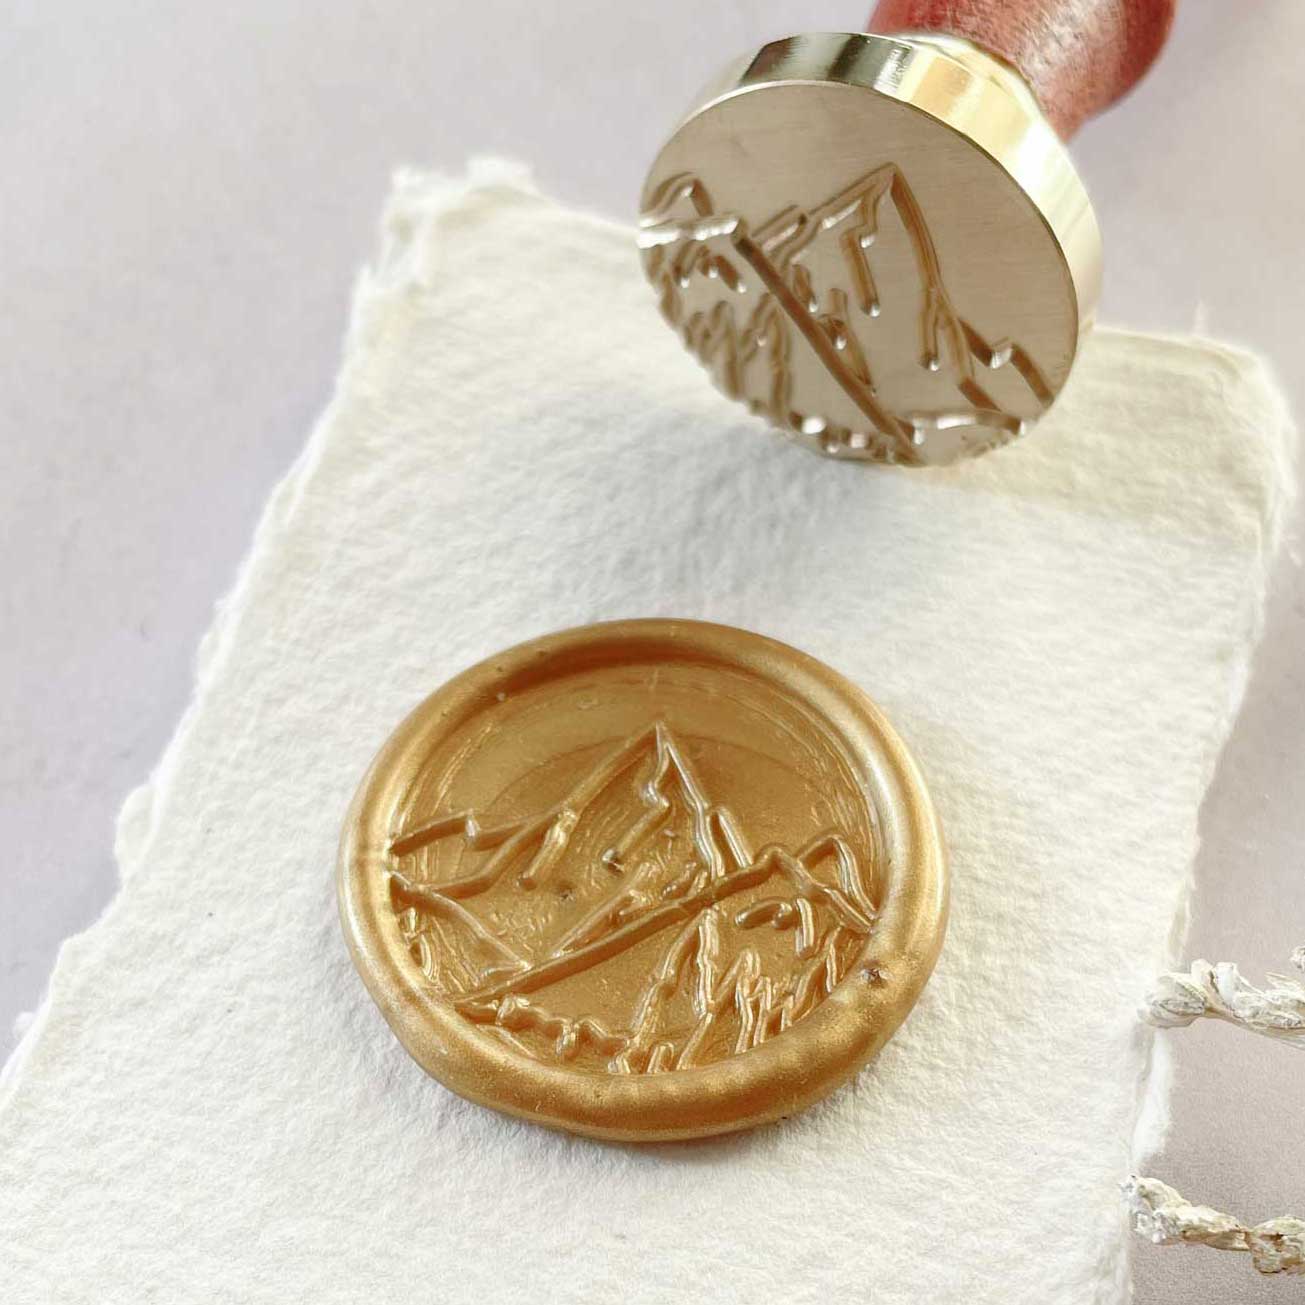 Mountain peak wax seals with an image of The Alps.  Sealing wax stamp for outdoor theme projects.  By The Natural Paper Company